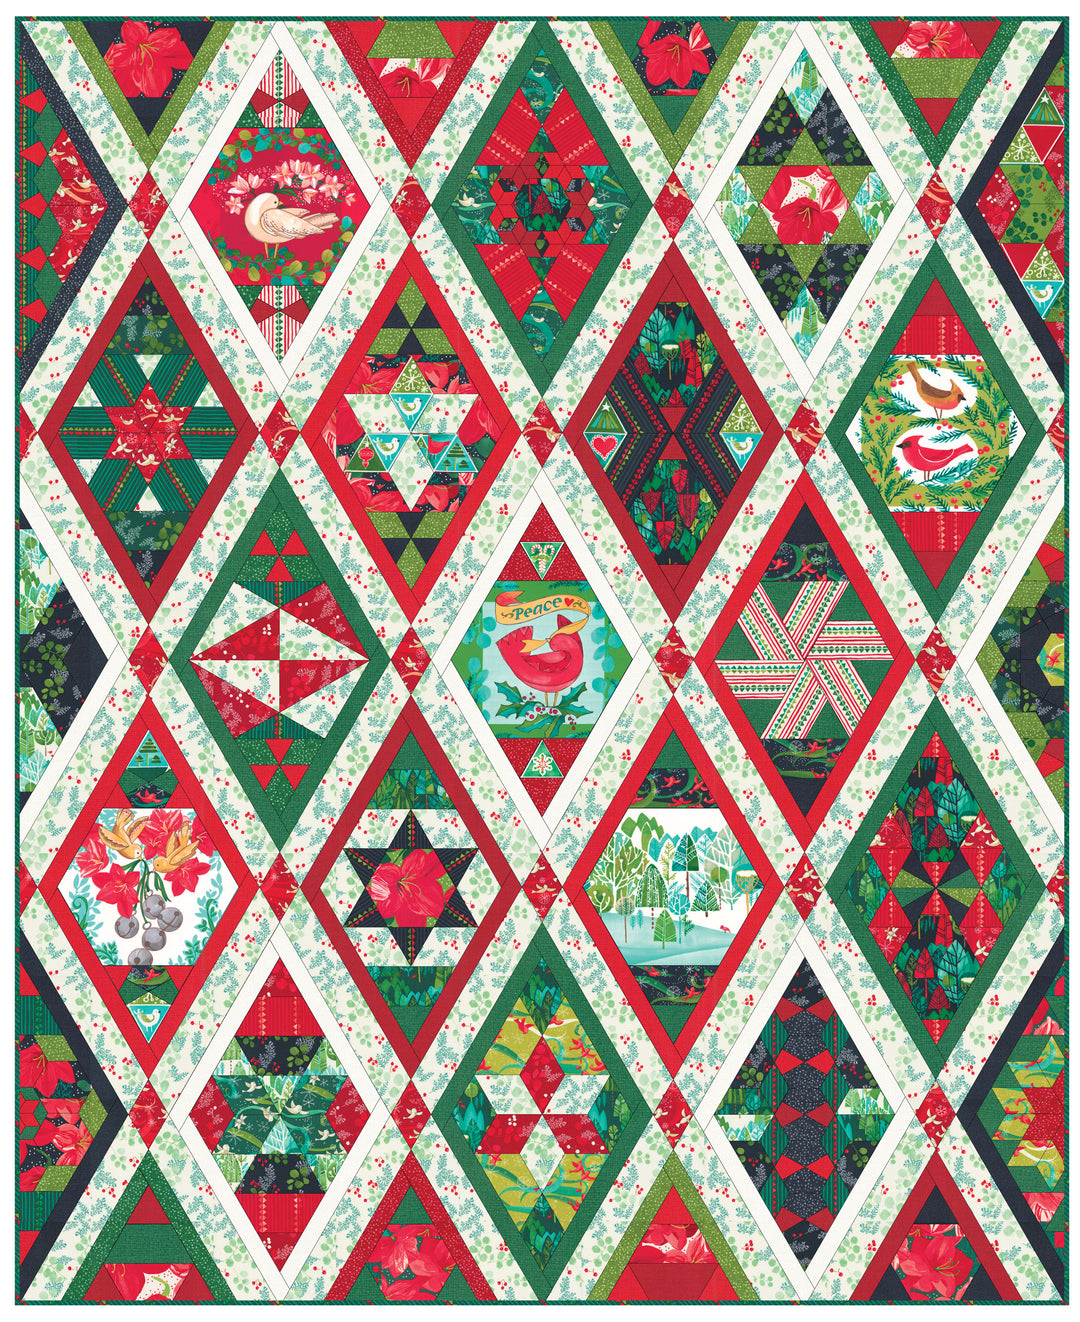 Queen of Diamonds - The Winterly Queen - Quilt Kit - Fabric Only - QODWINTER-KIT